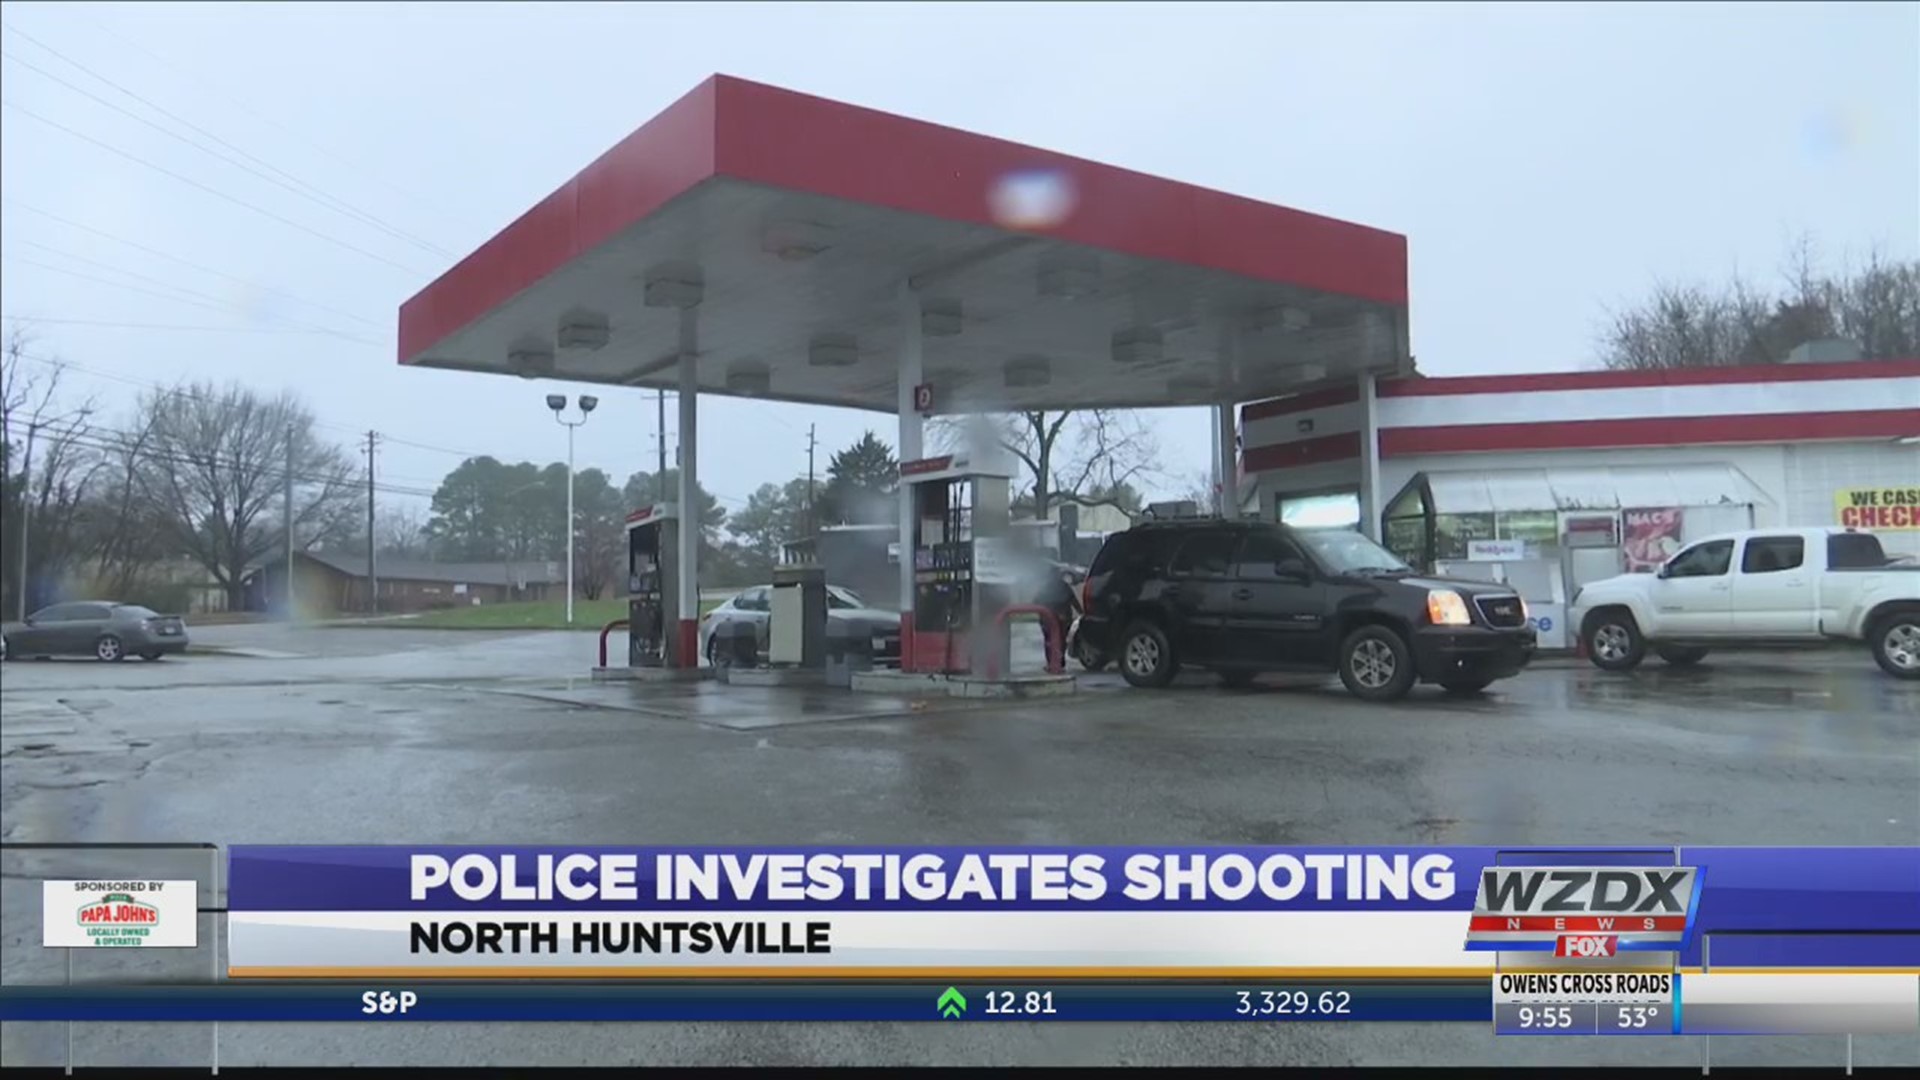 Huntsville police are searching for two suspects involved in a shooting that left one man seriously injured.